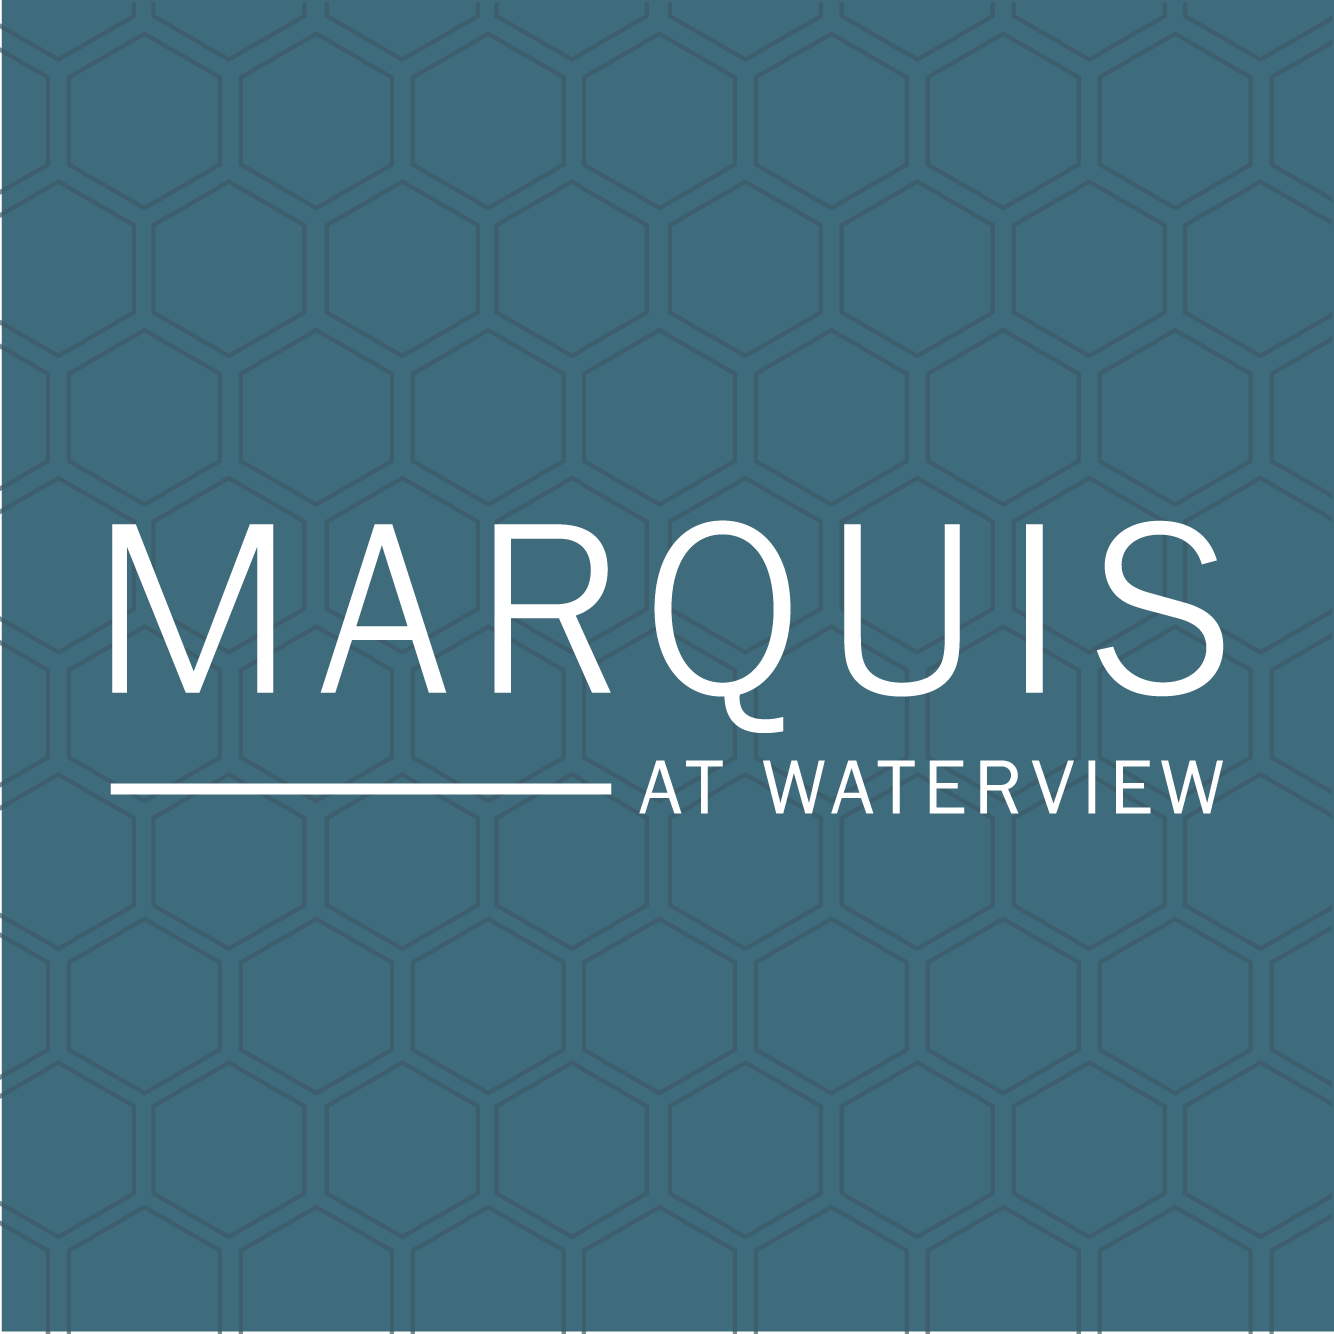 Company logo of Marquis at Waterview